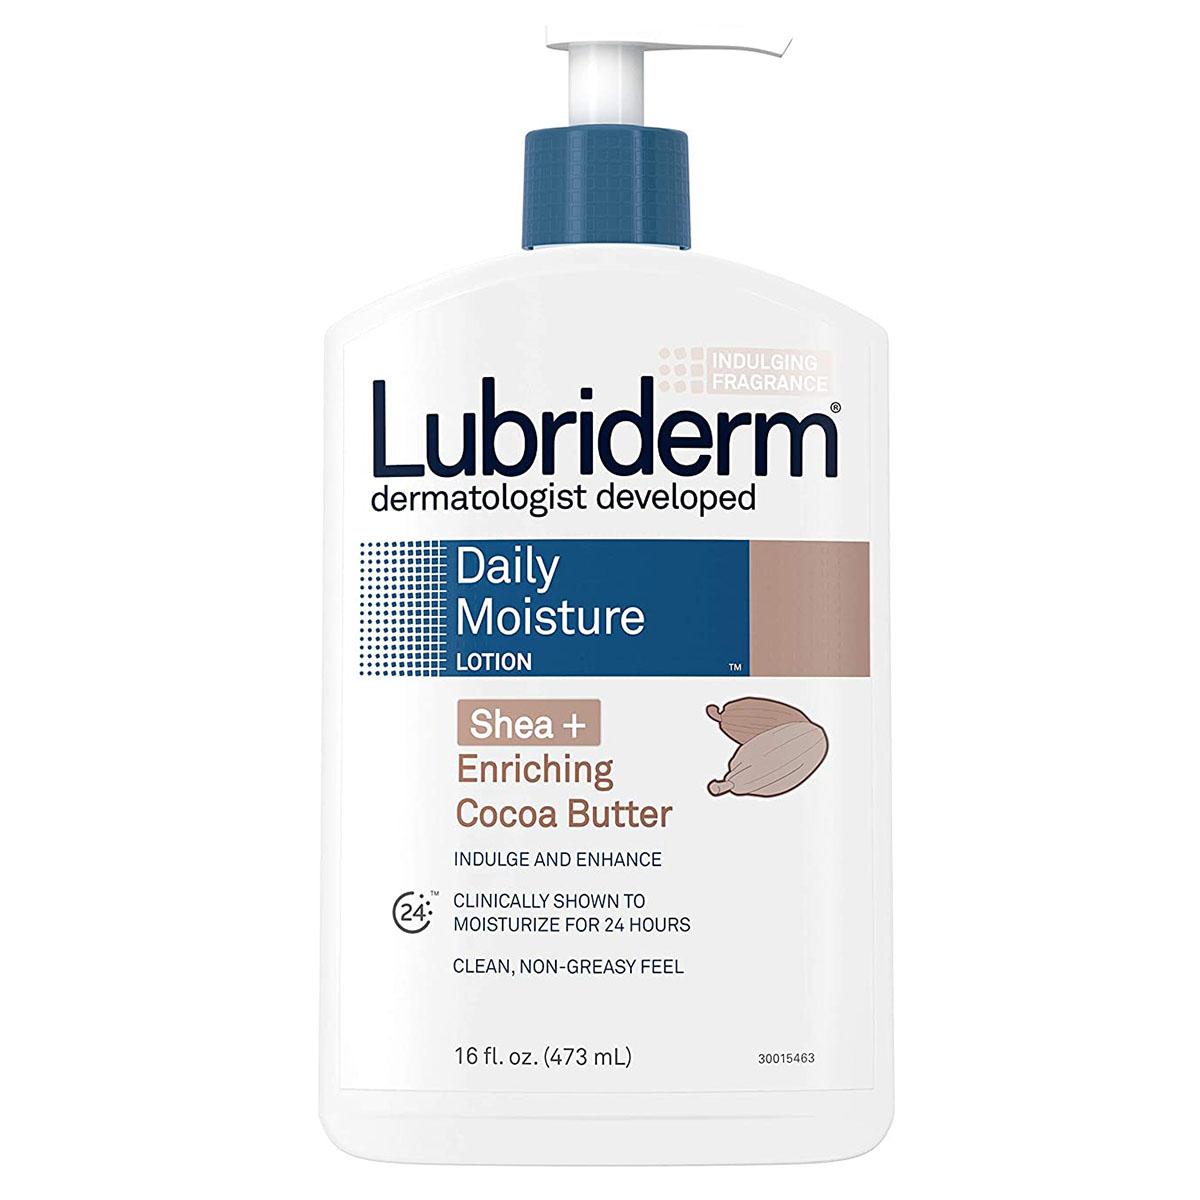 2 Lubriderm Daily Moisture Body Lotions for $9.08 Shipped